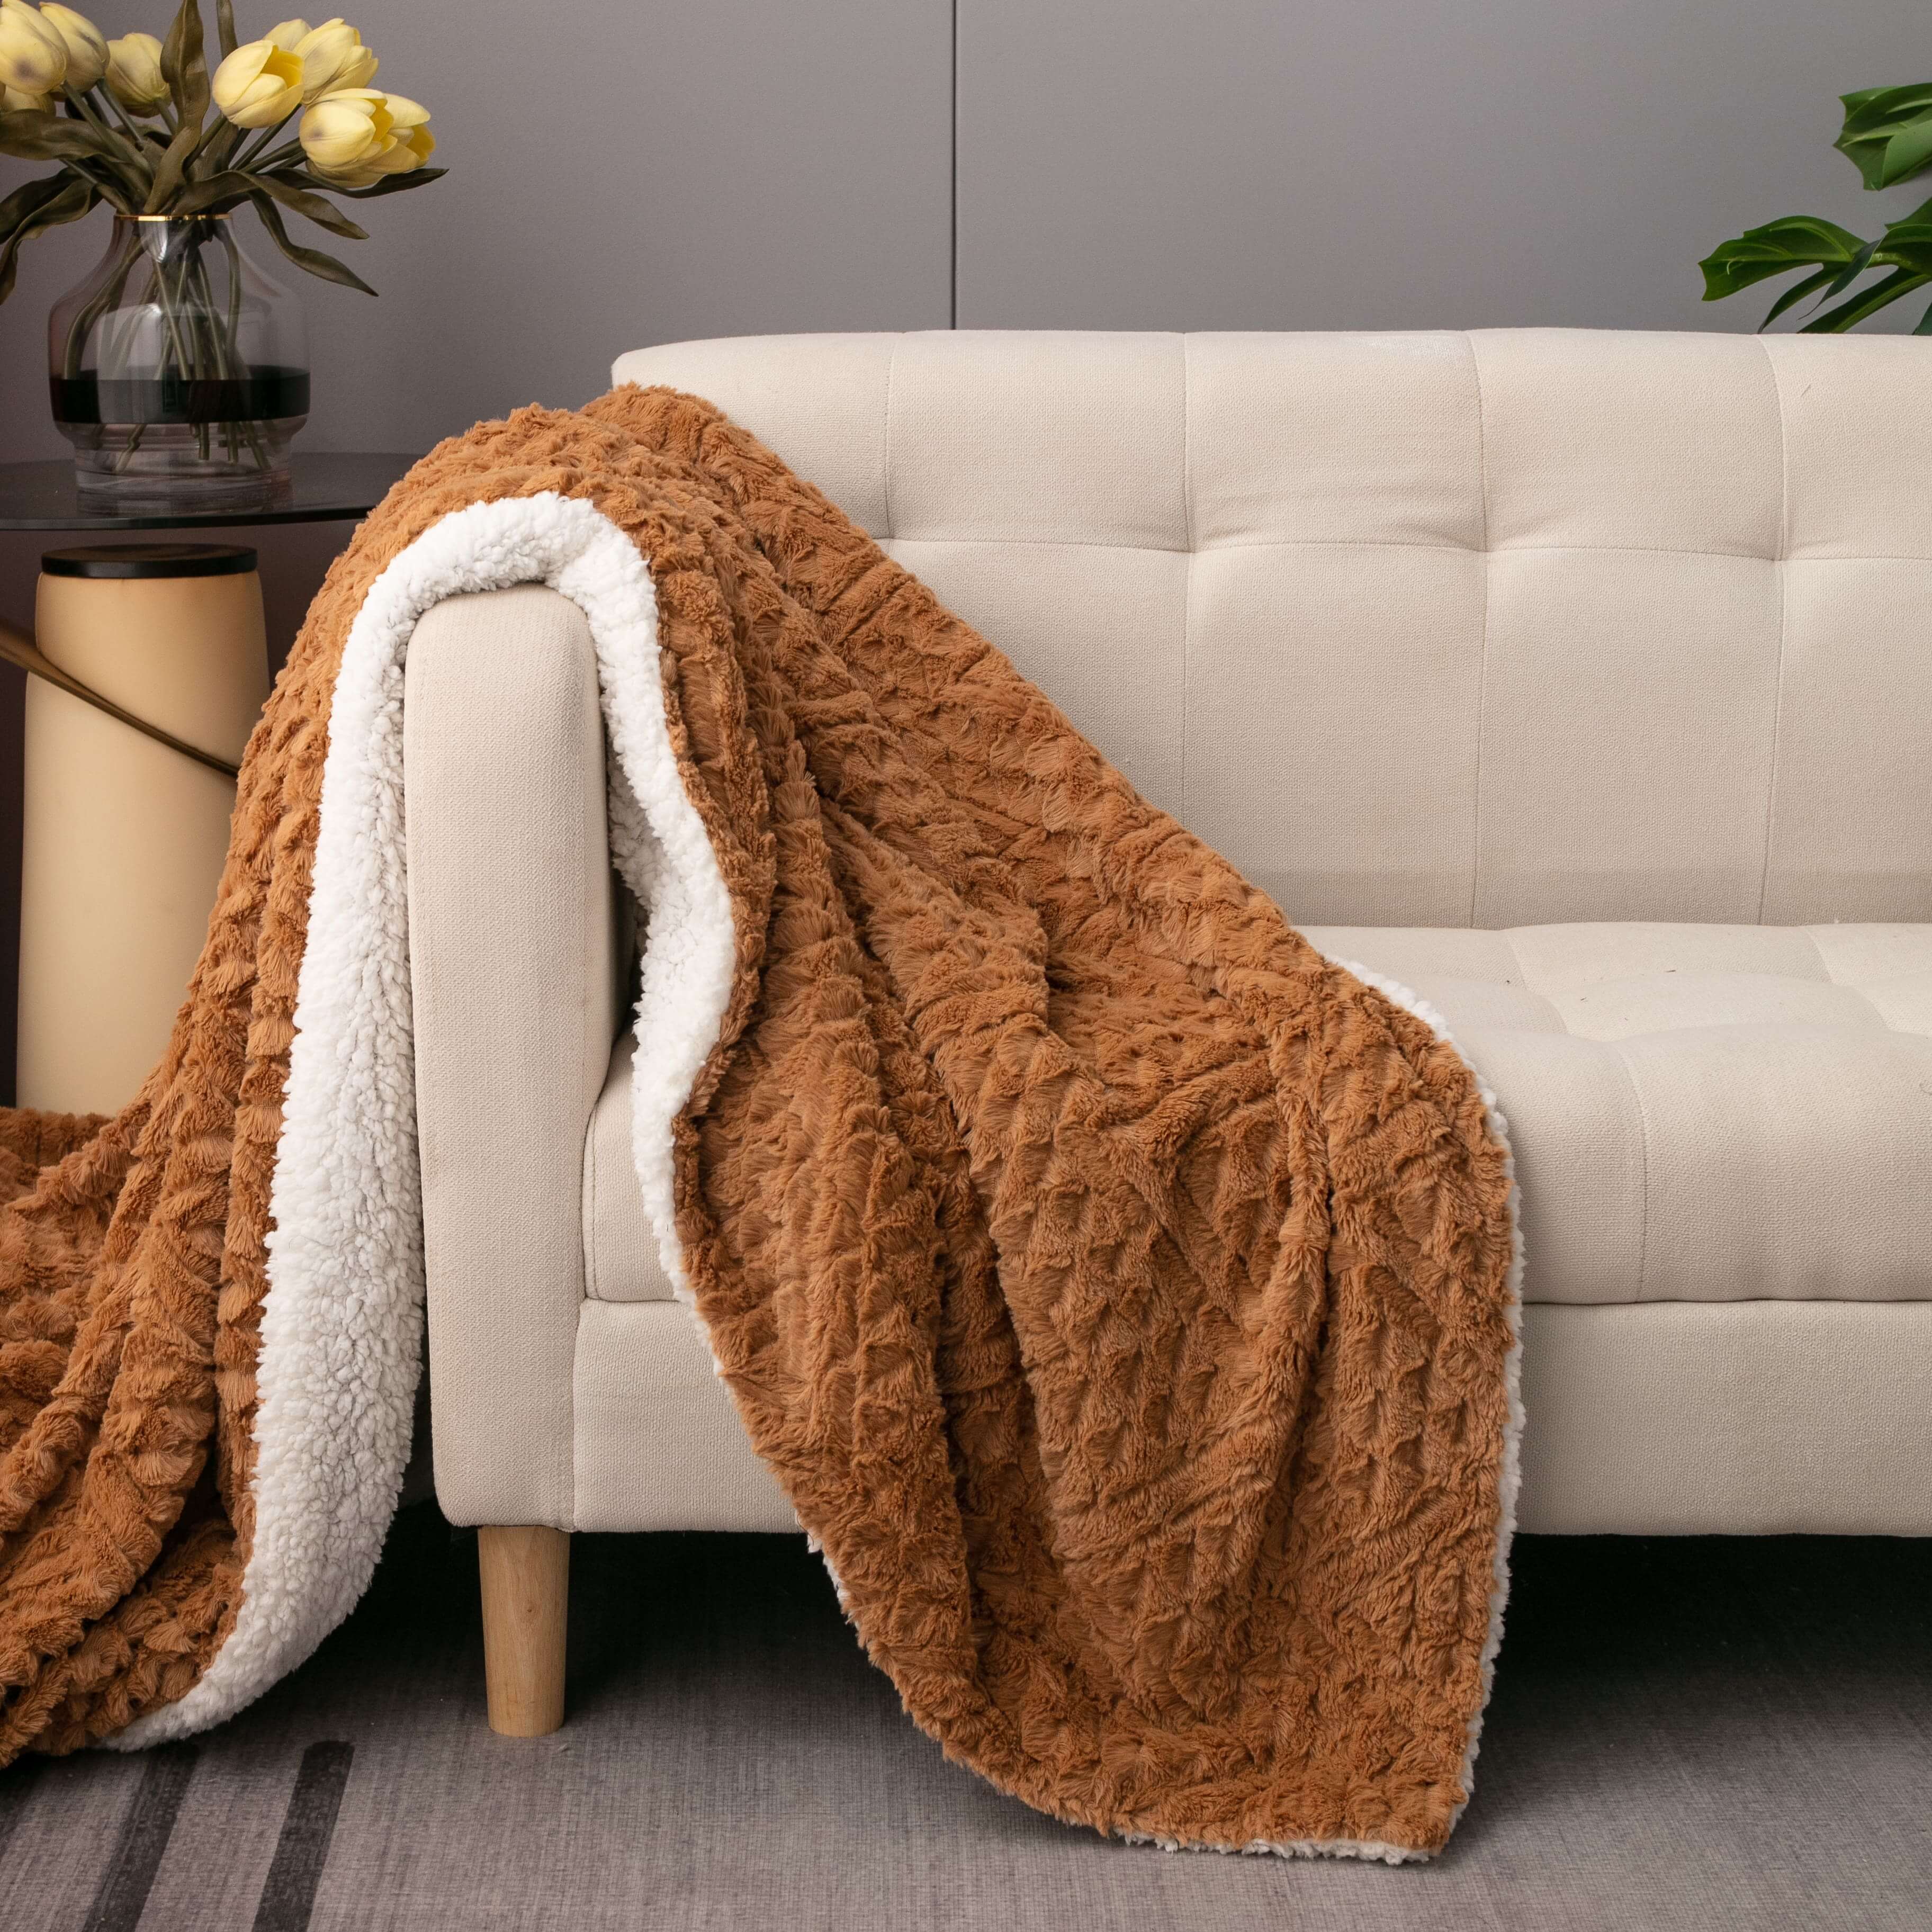 cozy light cognac camel brown faux fur sherpa throw blanket on casual living room couch. click to view all blankets. Elegant Luxury decorative couch sofa bed bedroom super soft cozy cuddly blanket